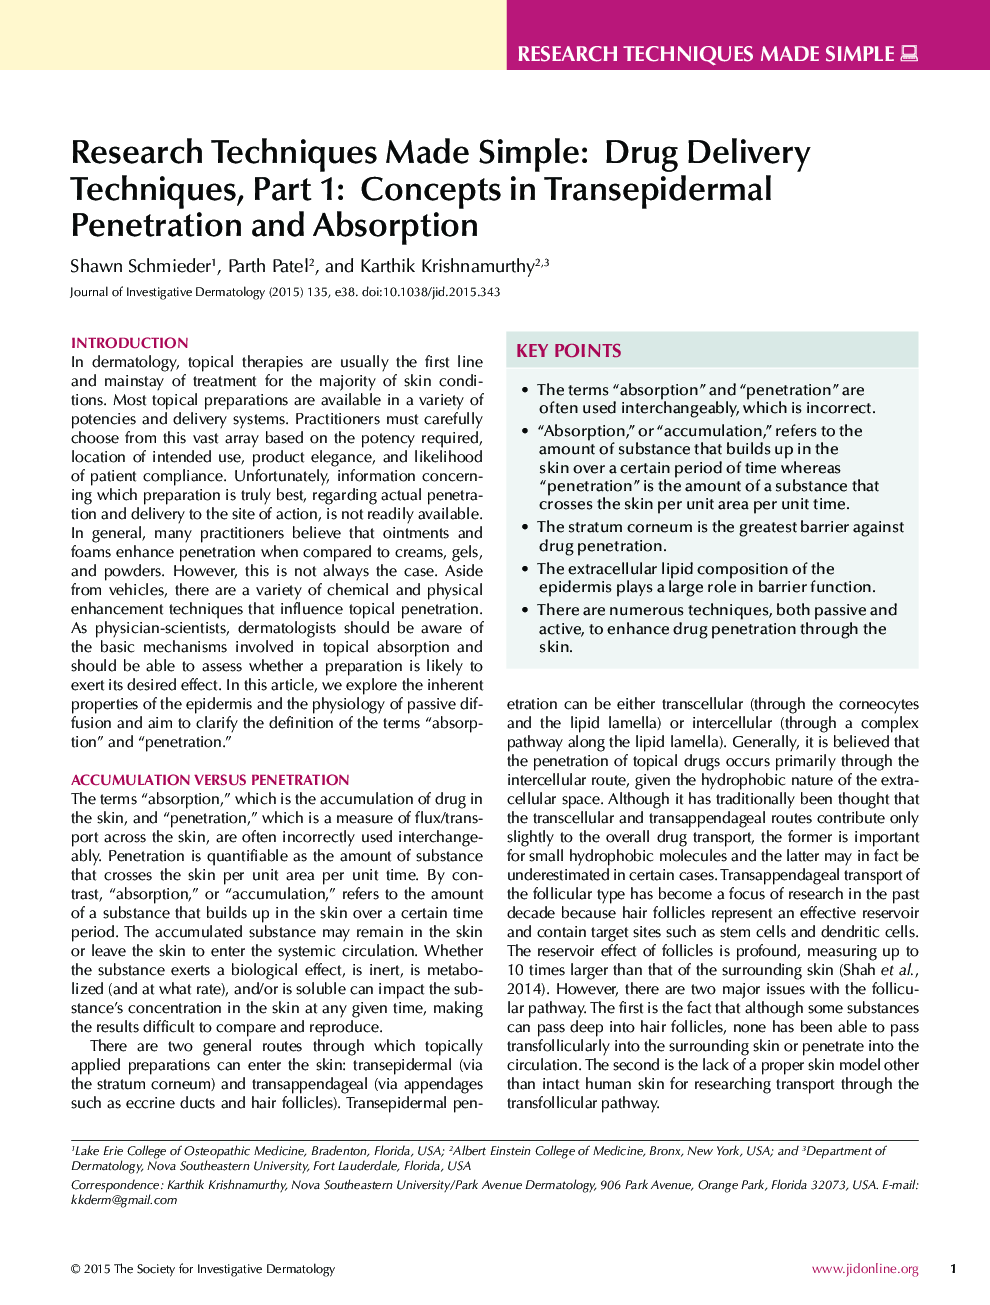 Research Techniques Made Simple: Drug Delivery Techniques, Part 1: Concepts in Transepidermal Penetration and Absorption